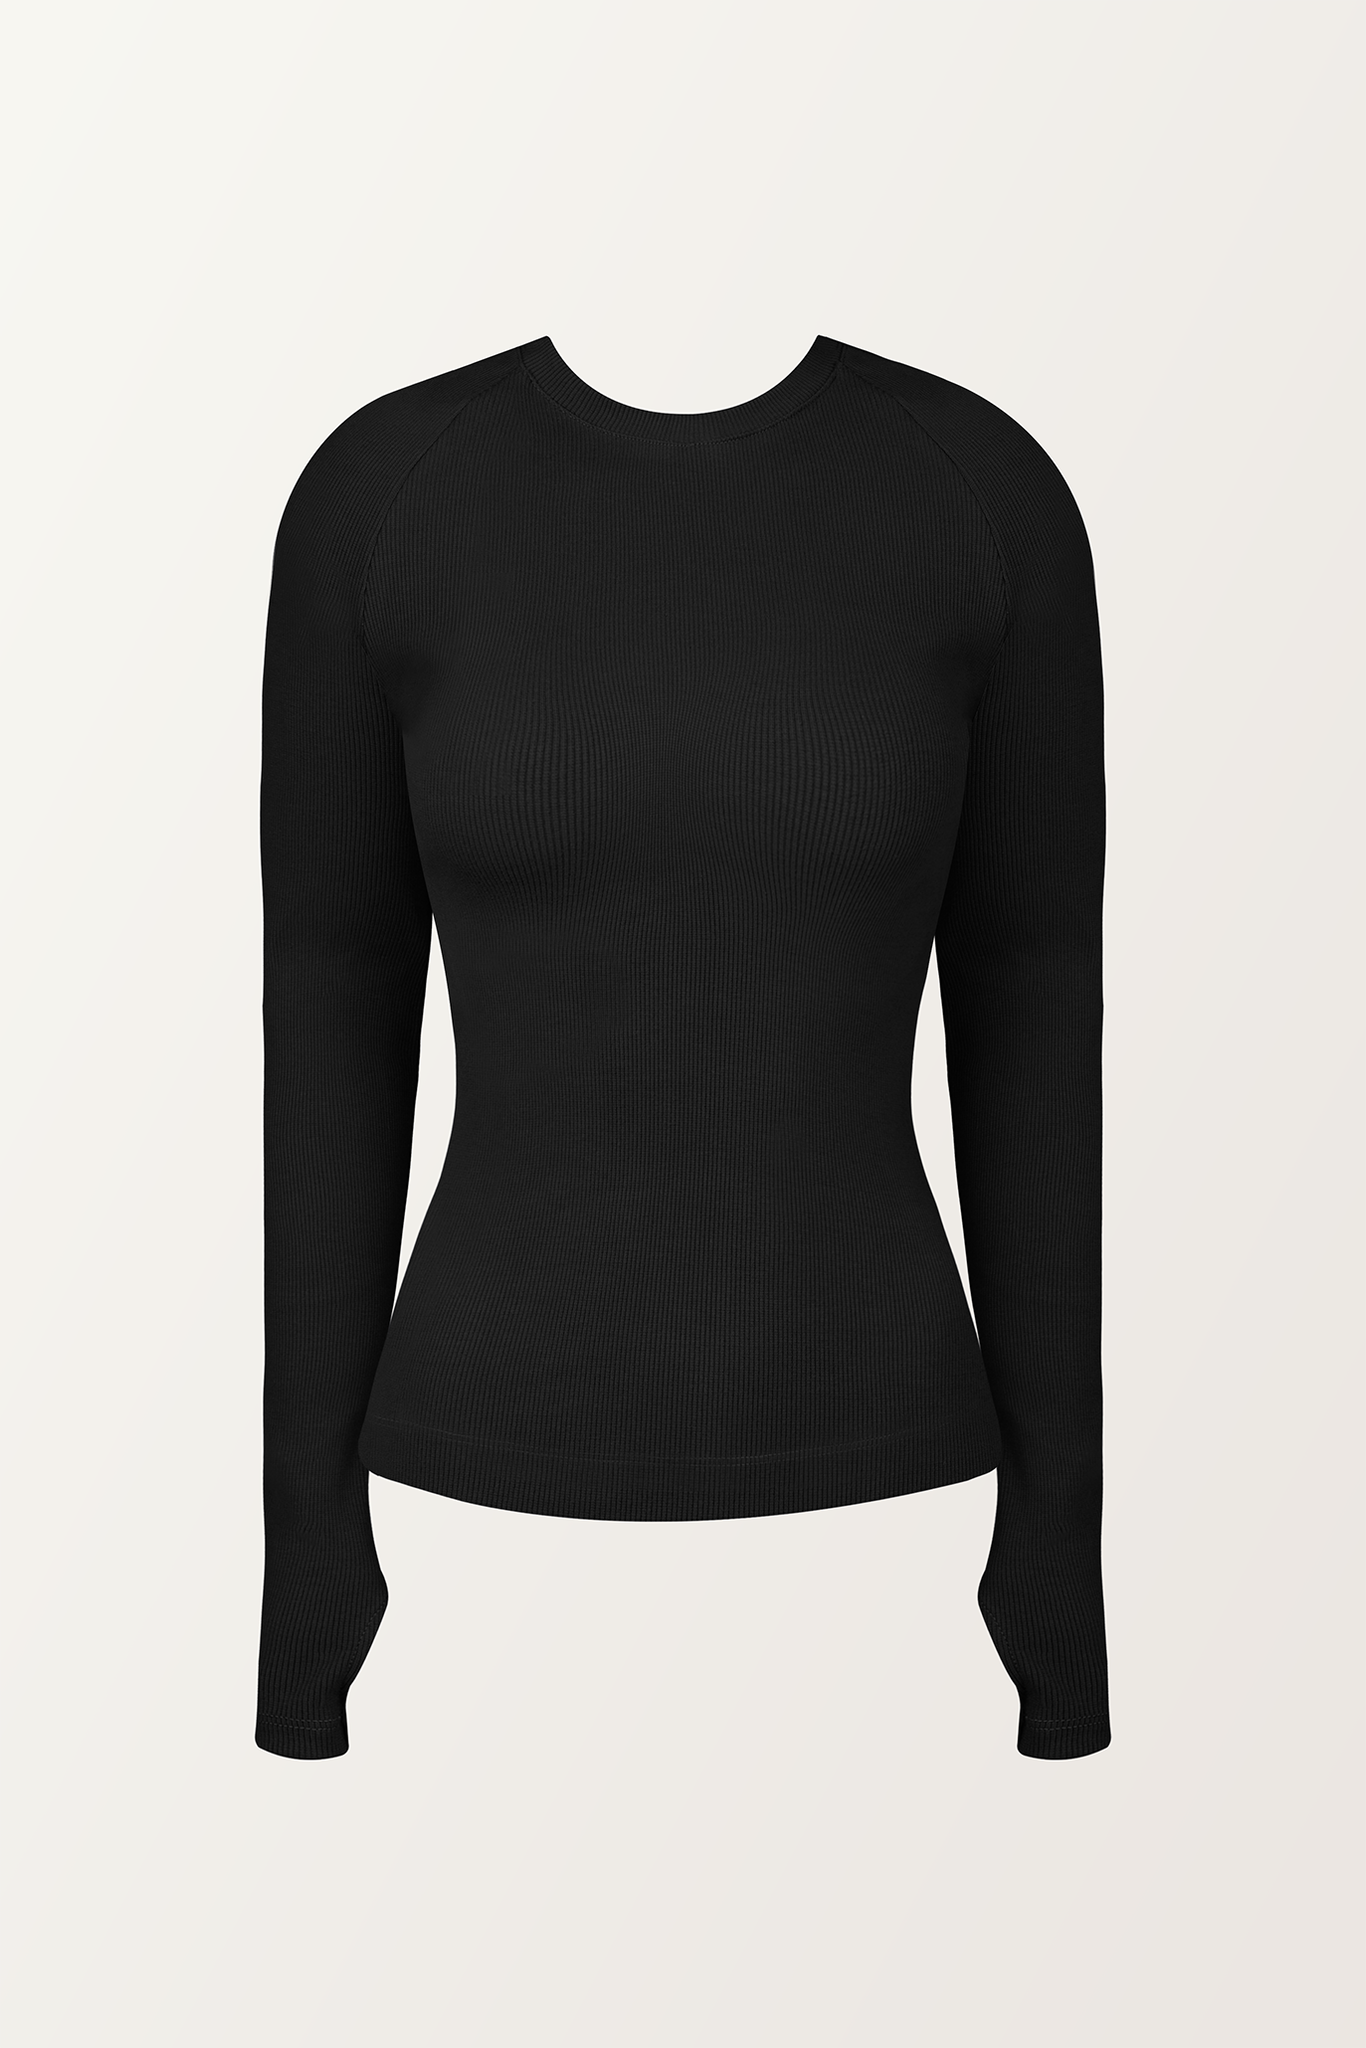 PIXIE WON'T PLAY TRINITY LONG - SLEEVE TOP RIBBED BLACK ORGANIC COTTON SUSTAINABLE FASHION WEAR WITHOUT BRA LUXURY STYLISH COMFORTABLE BREATHABLE FABRIC VERSATILE RELAXED FIT SOFT TRENDY SUMMER AUTUMN WINTER SPRING WEAR CASUAL OUTFIT WORKOUT LAYERING VARIOUS COLORS FASHIONABLE MUST-HAVE EVERYDAY ESSENTIALS